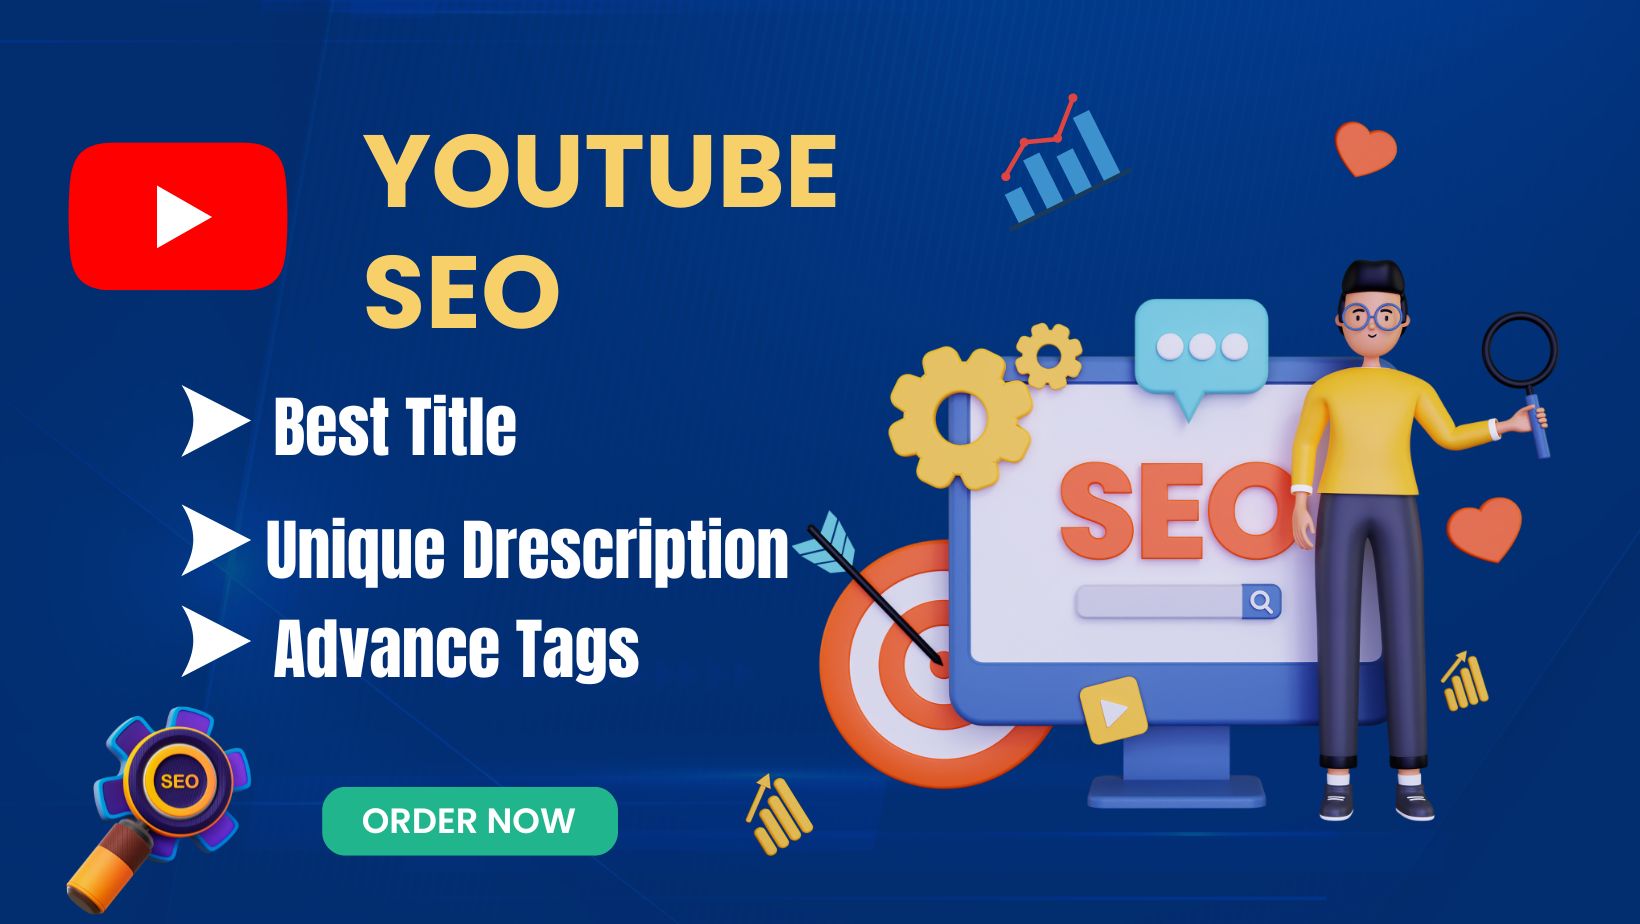 I will optimize SEO title, description and tags for YouTube videos